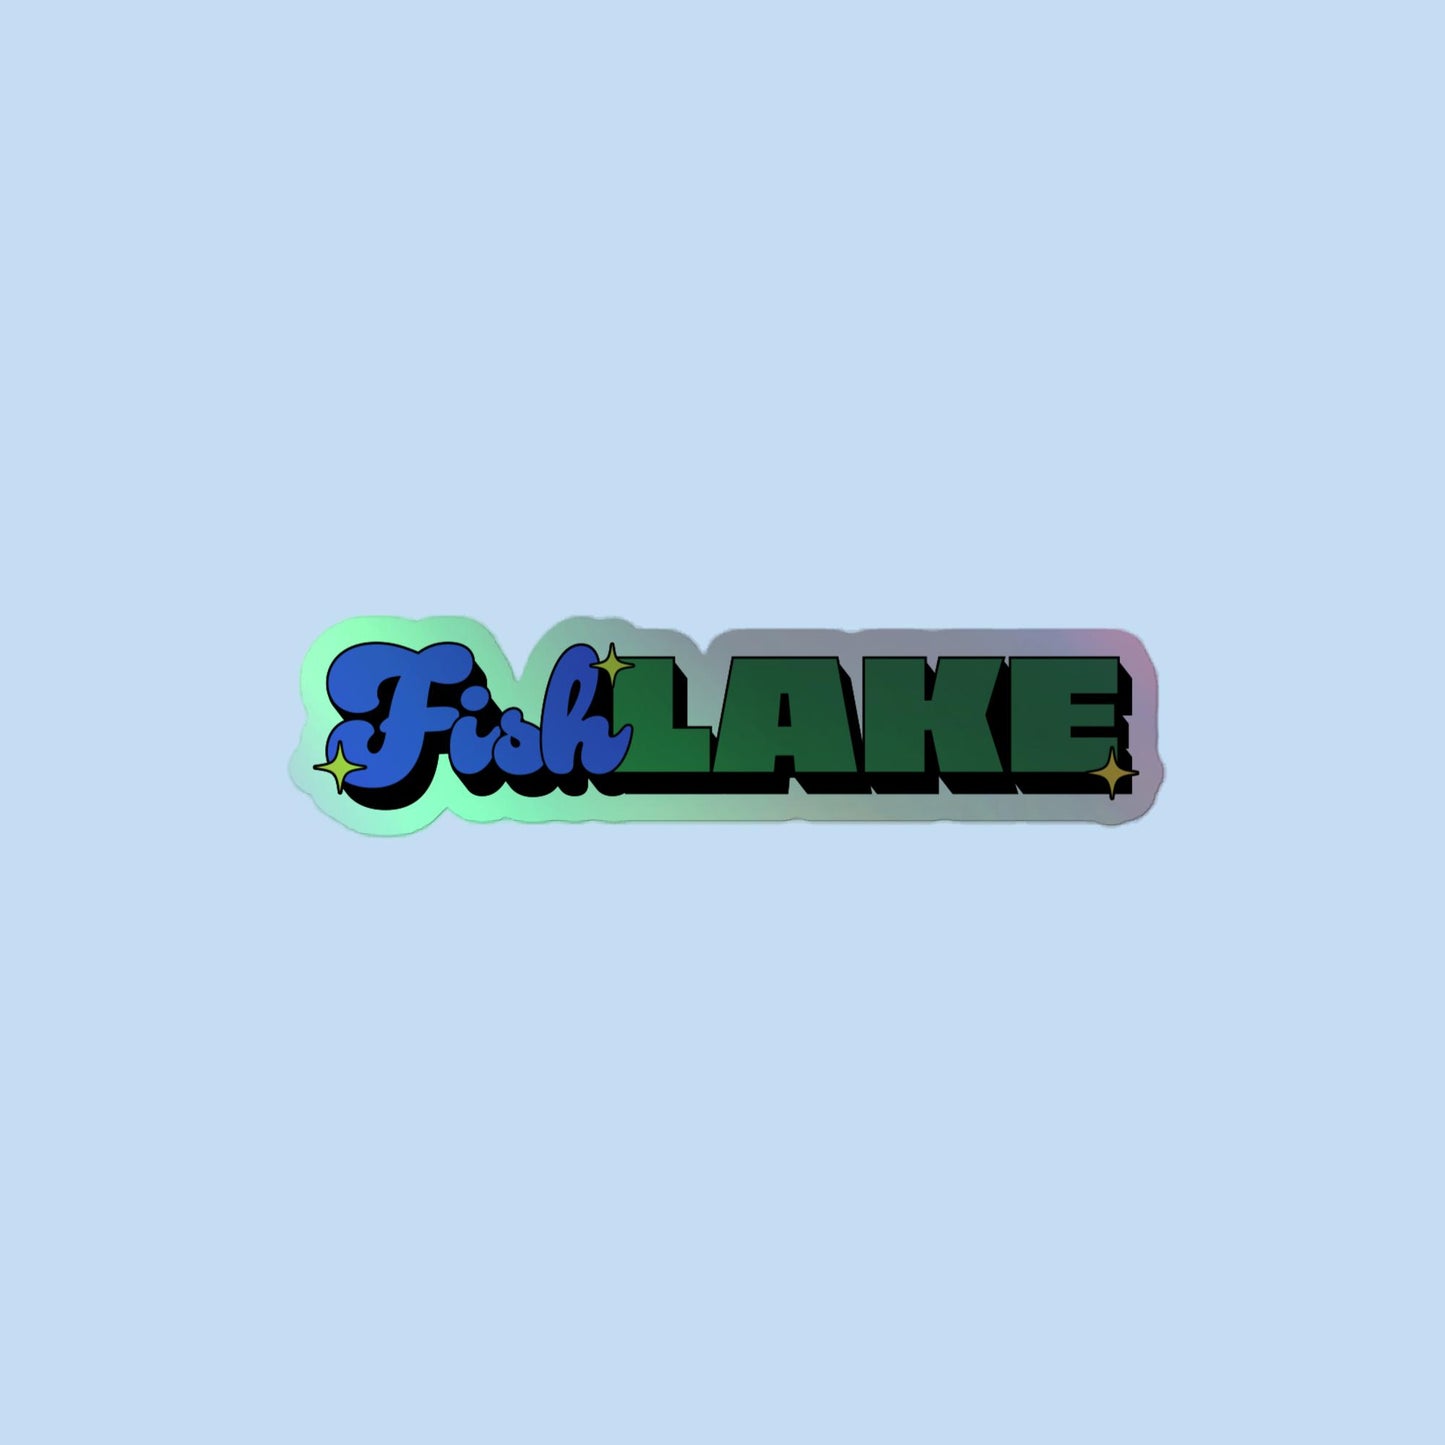 Holographic Fish Lake Sticker - Inspired by Chris Lake & Fisher